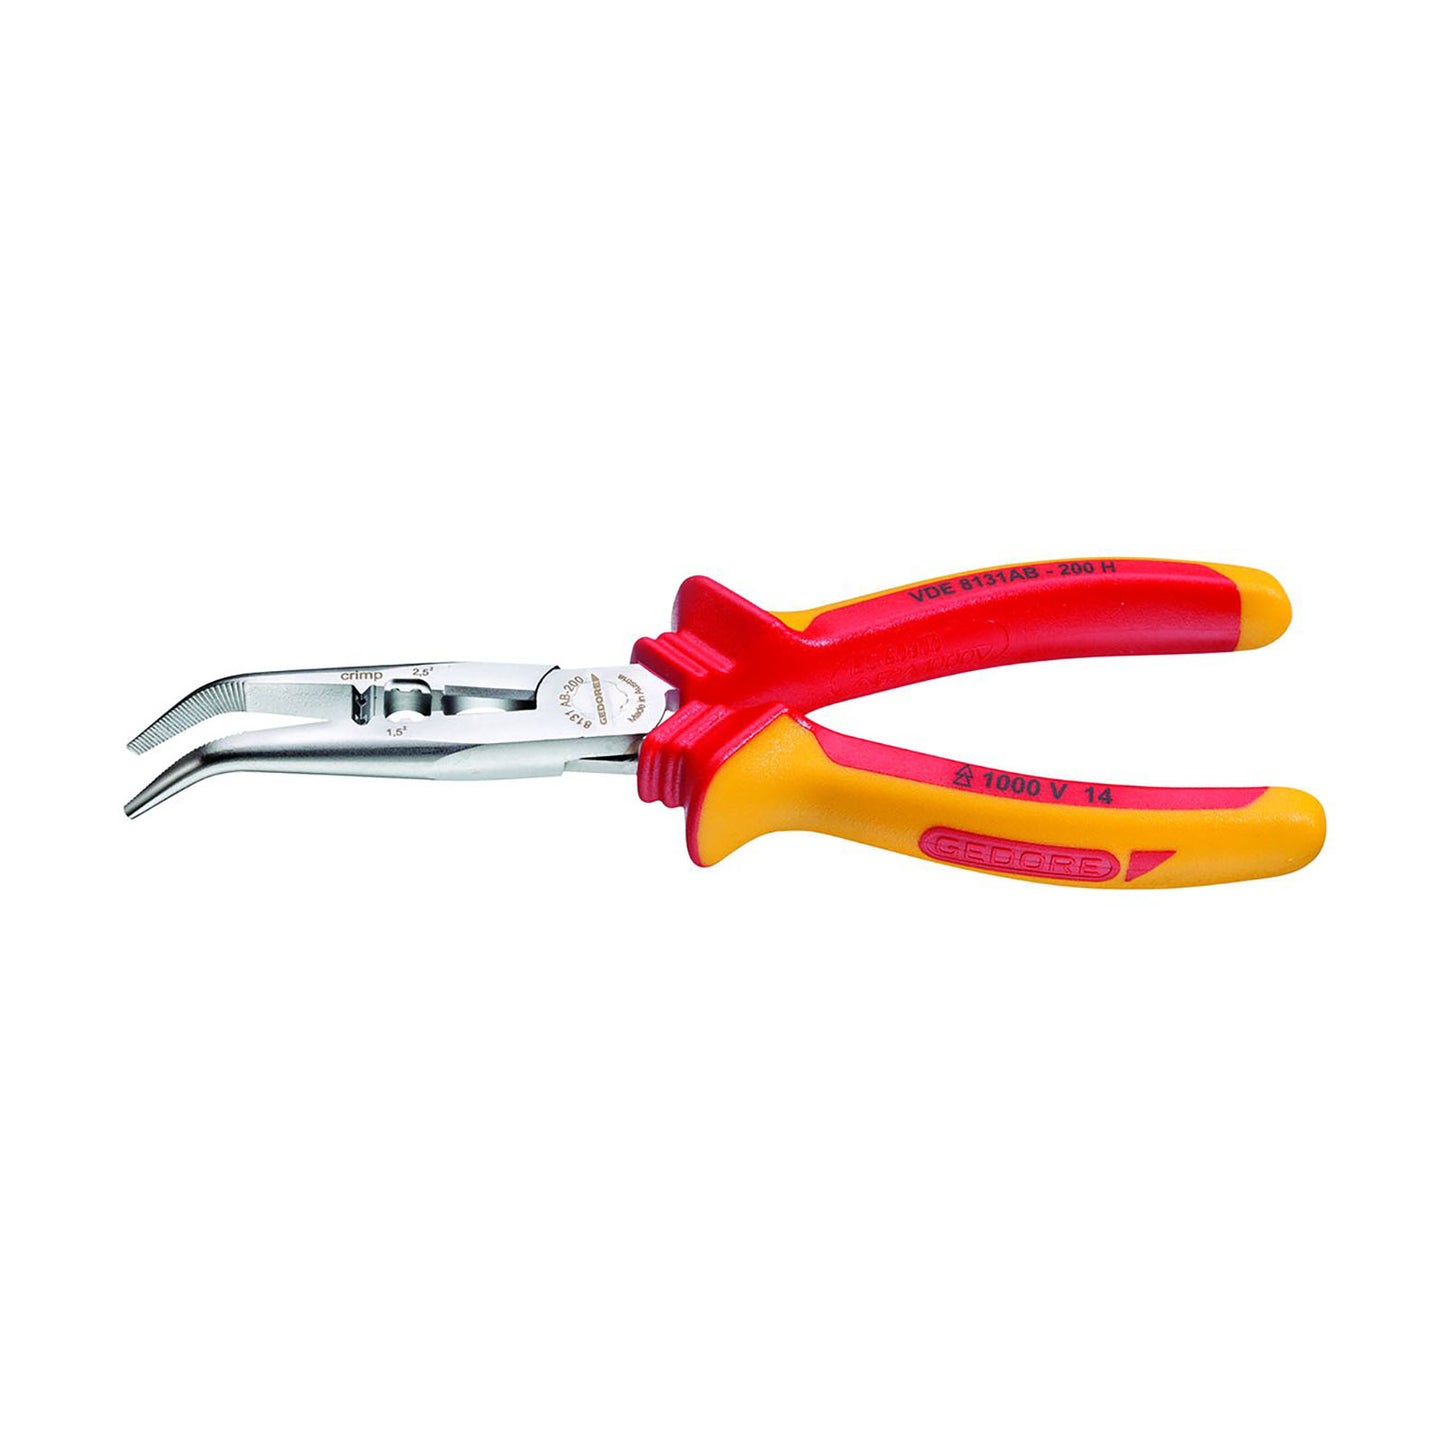 GEDORE SB VDE 8131 AB-200 H - VDE multiple action pliers (3100383)